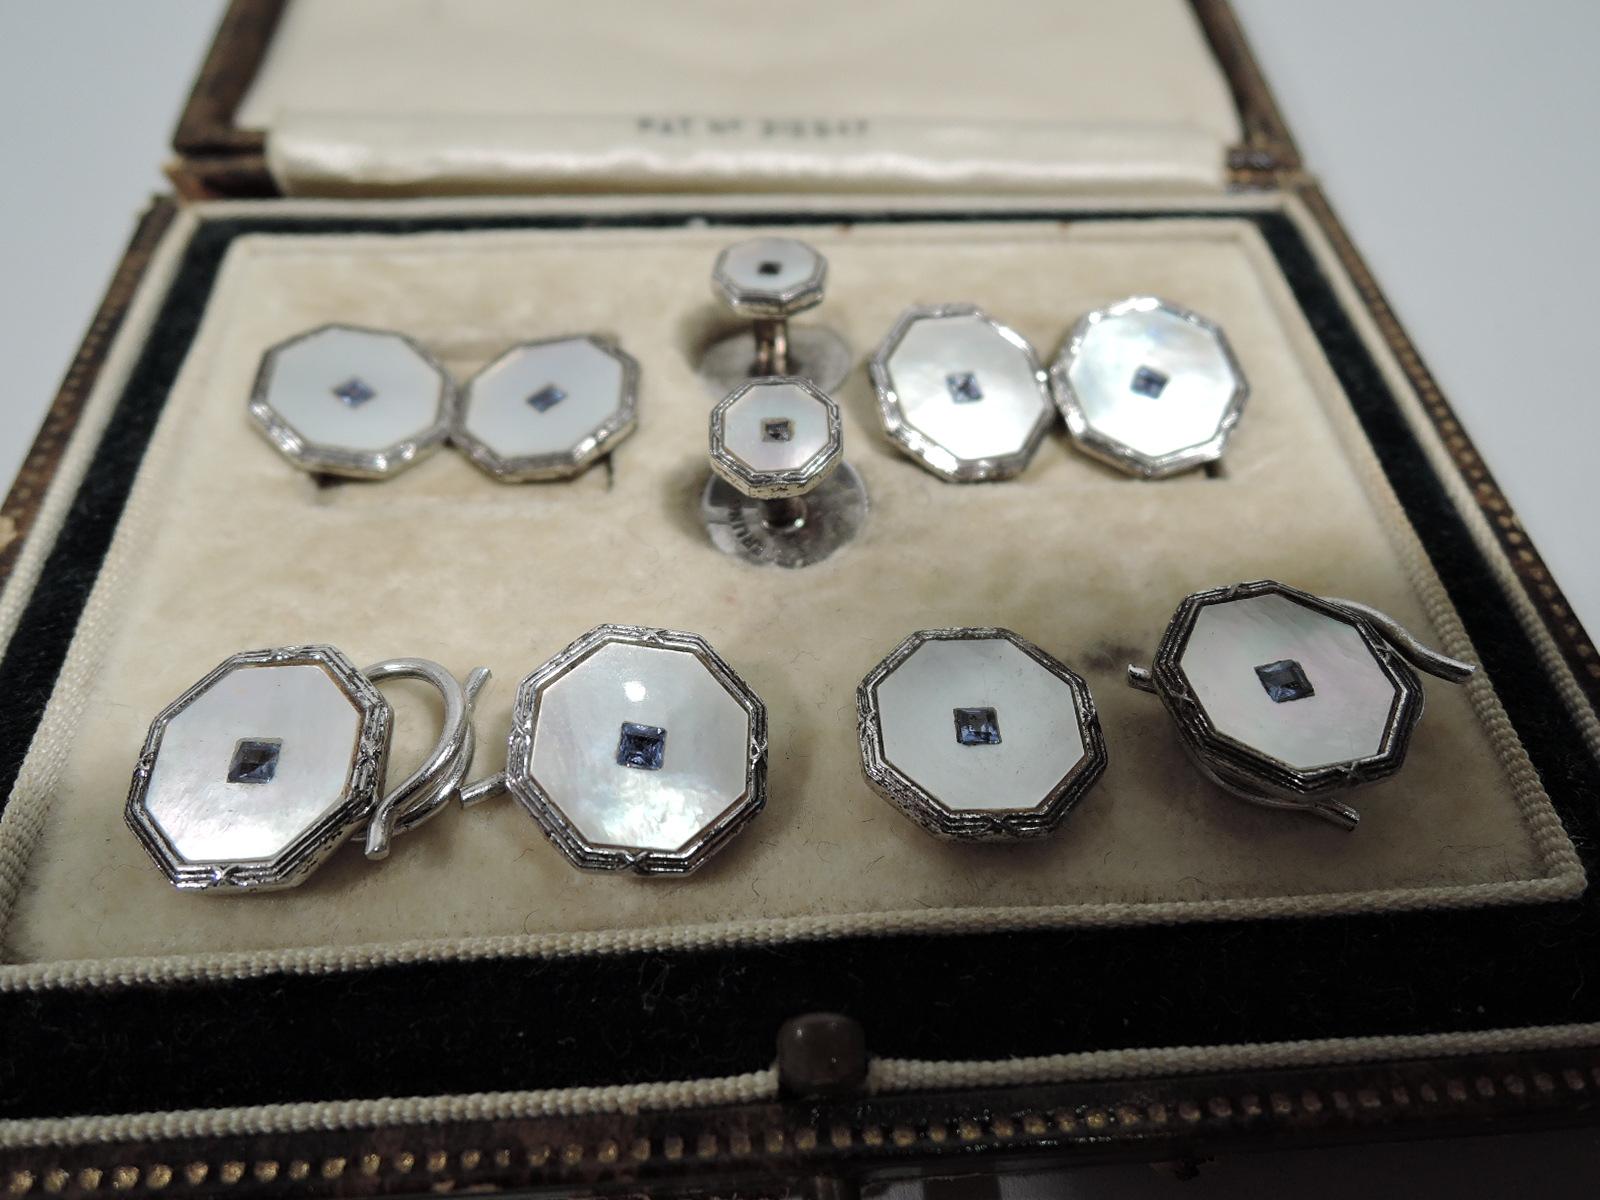 Handsome set comprising pair of cufflinks, pair of studs, and 4 buttons. Each: Octagonal mother of pearl centrally mounted with square sapphire; reeded sterling silver mount. United States, ca 1920s. Marked “Sterling” with maker’s mark CP in lozenge.